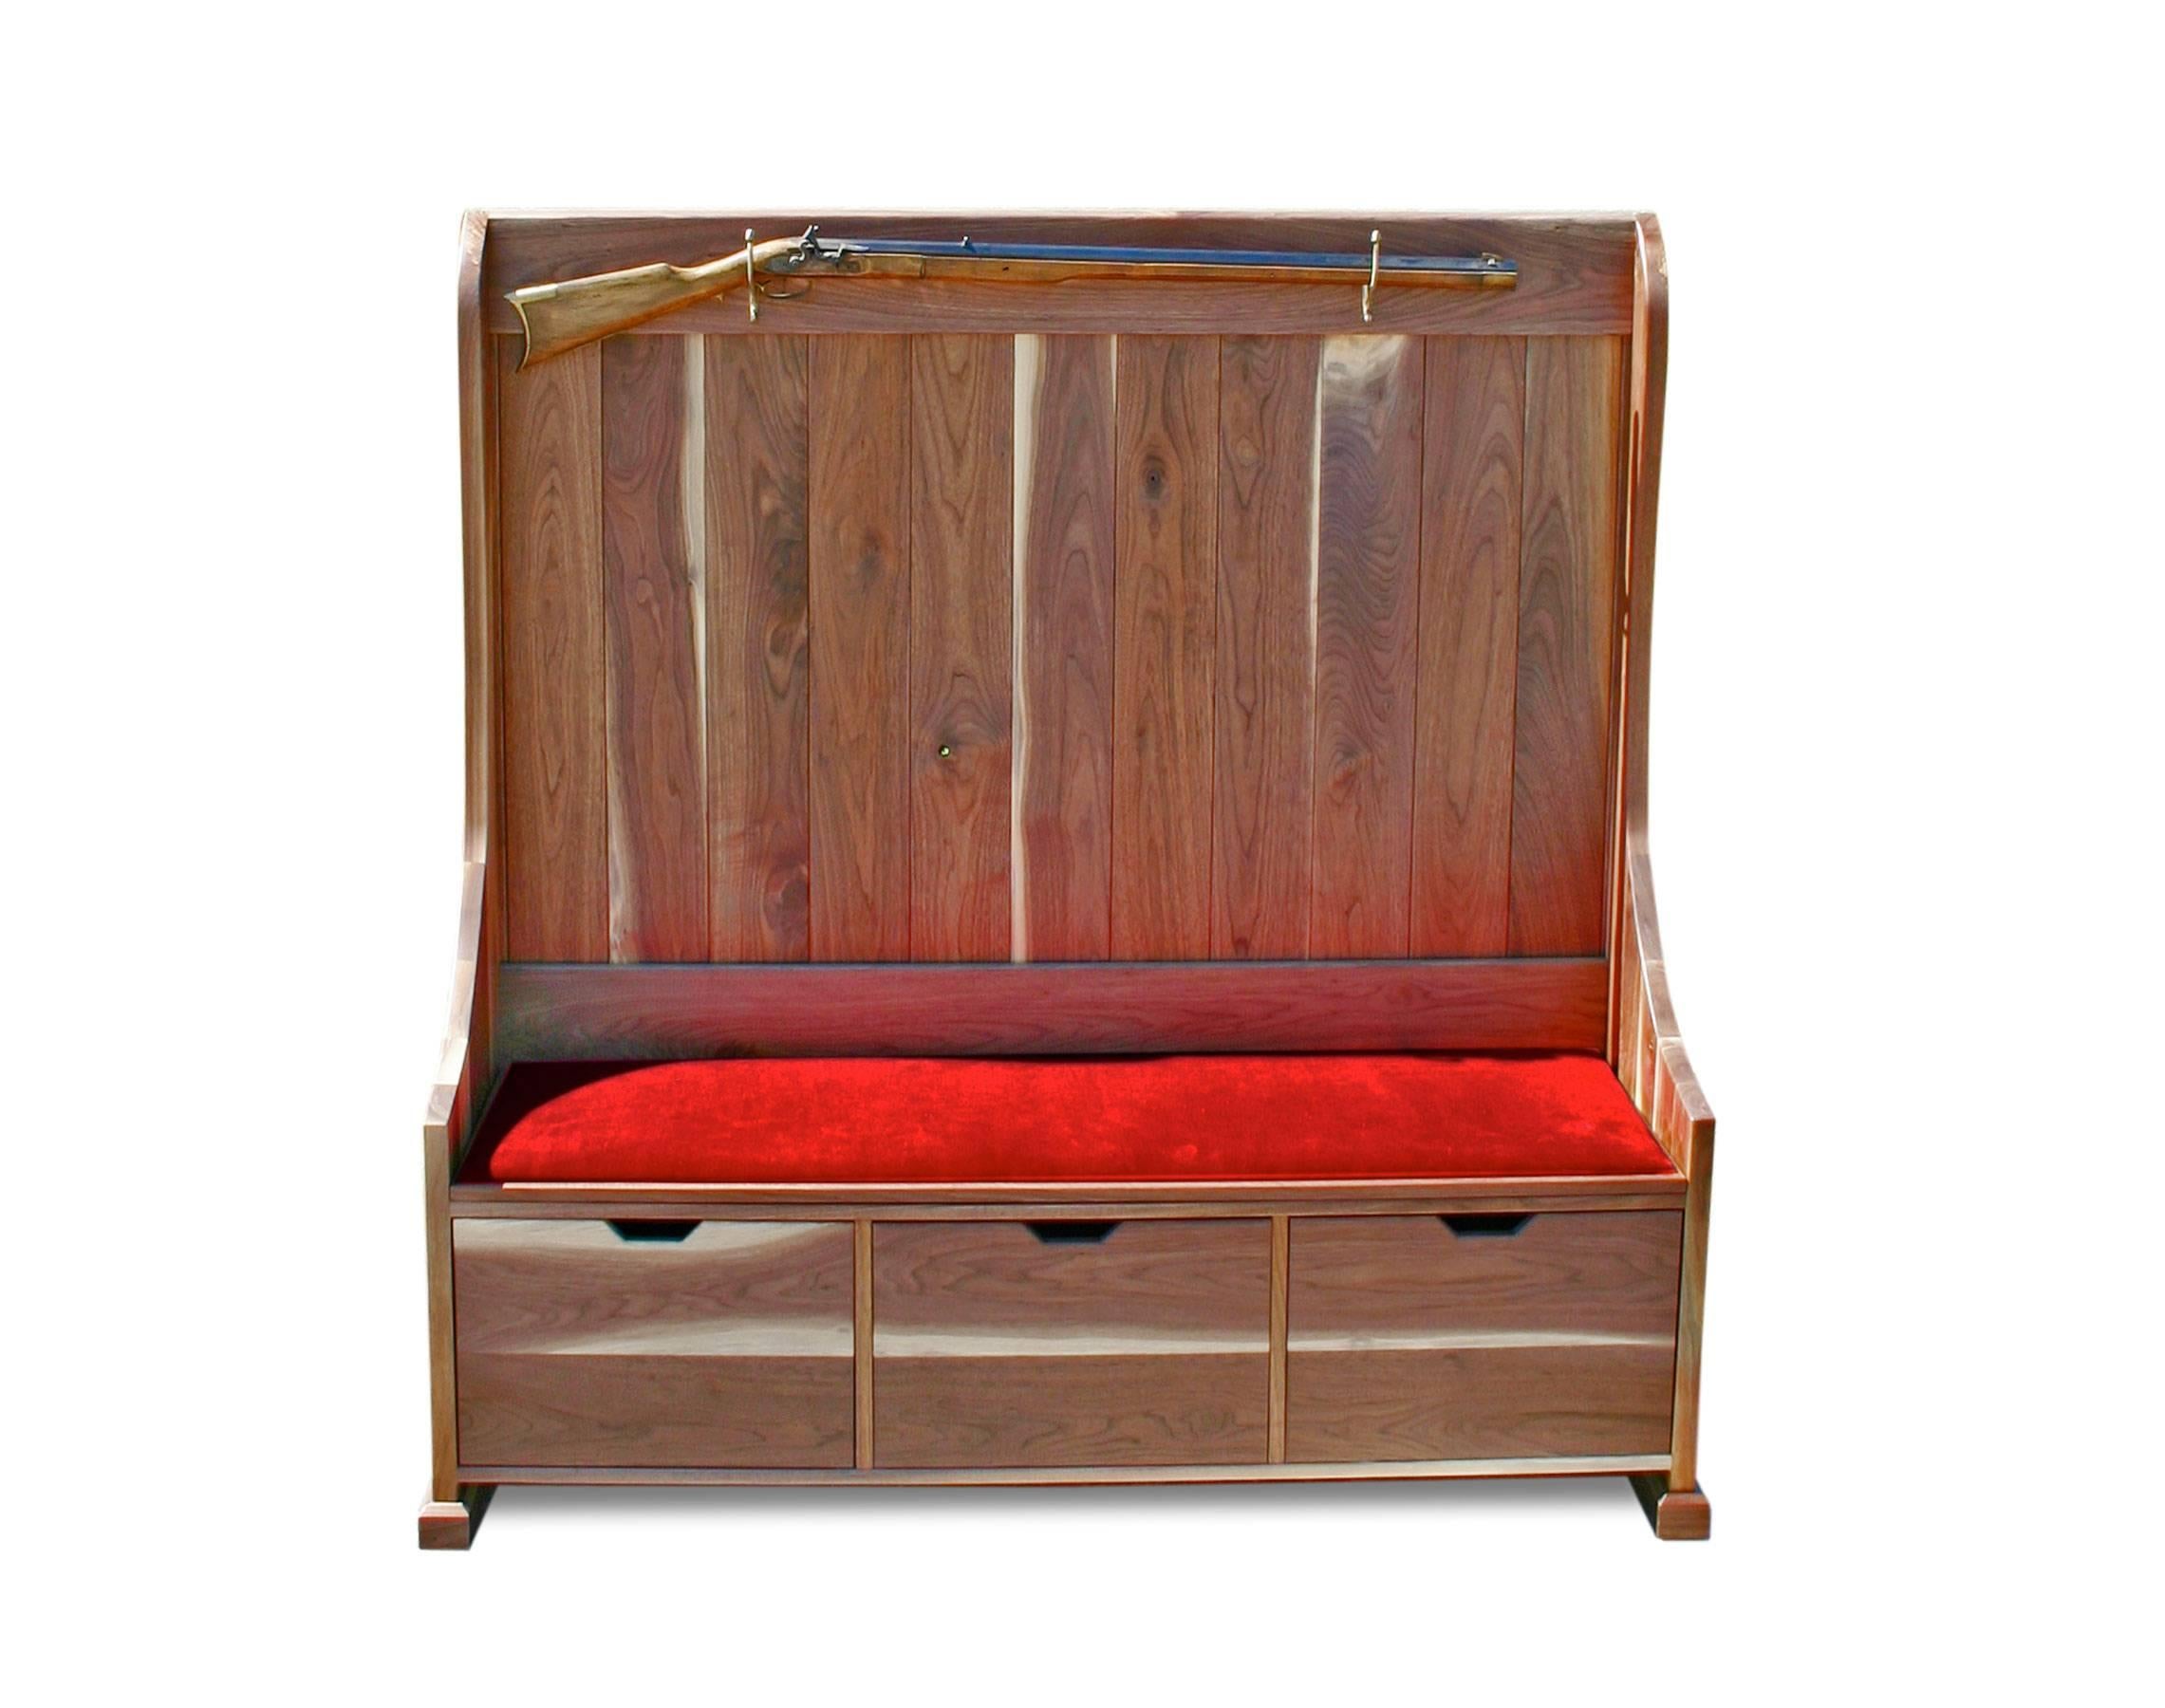 Traditional Deacon's bench with three storage drawers underneath and two coat hooks. Perfect for a mudroom or hallway. This Classic piece was made for the 2011 International Contemporary Furniture Fair and is a one of a kind prototype. 

The bench